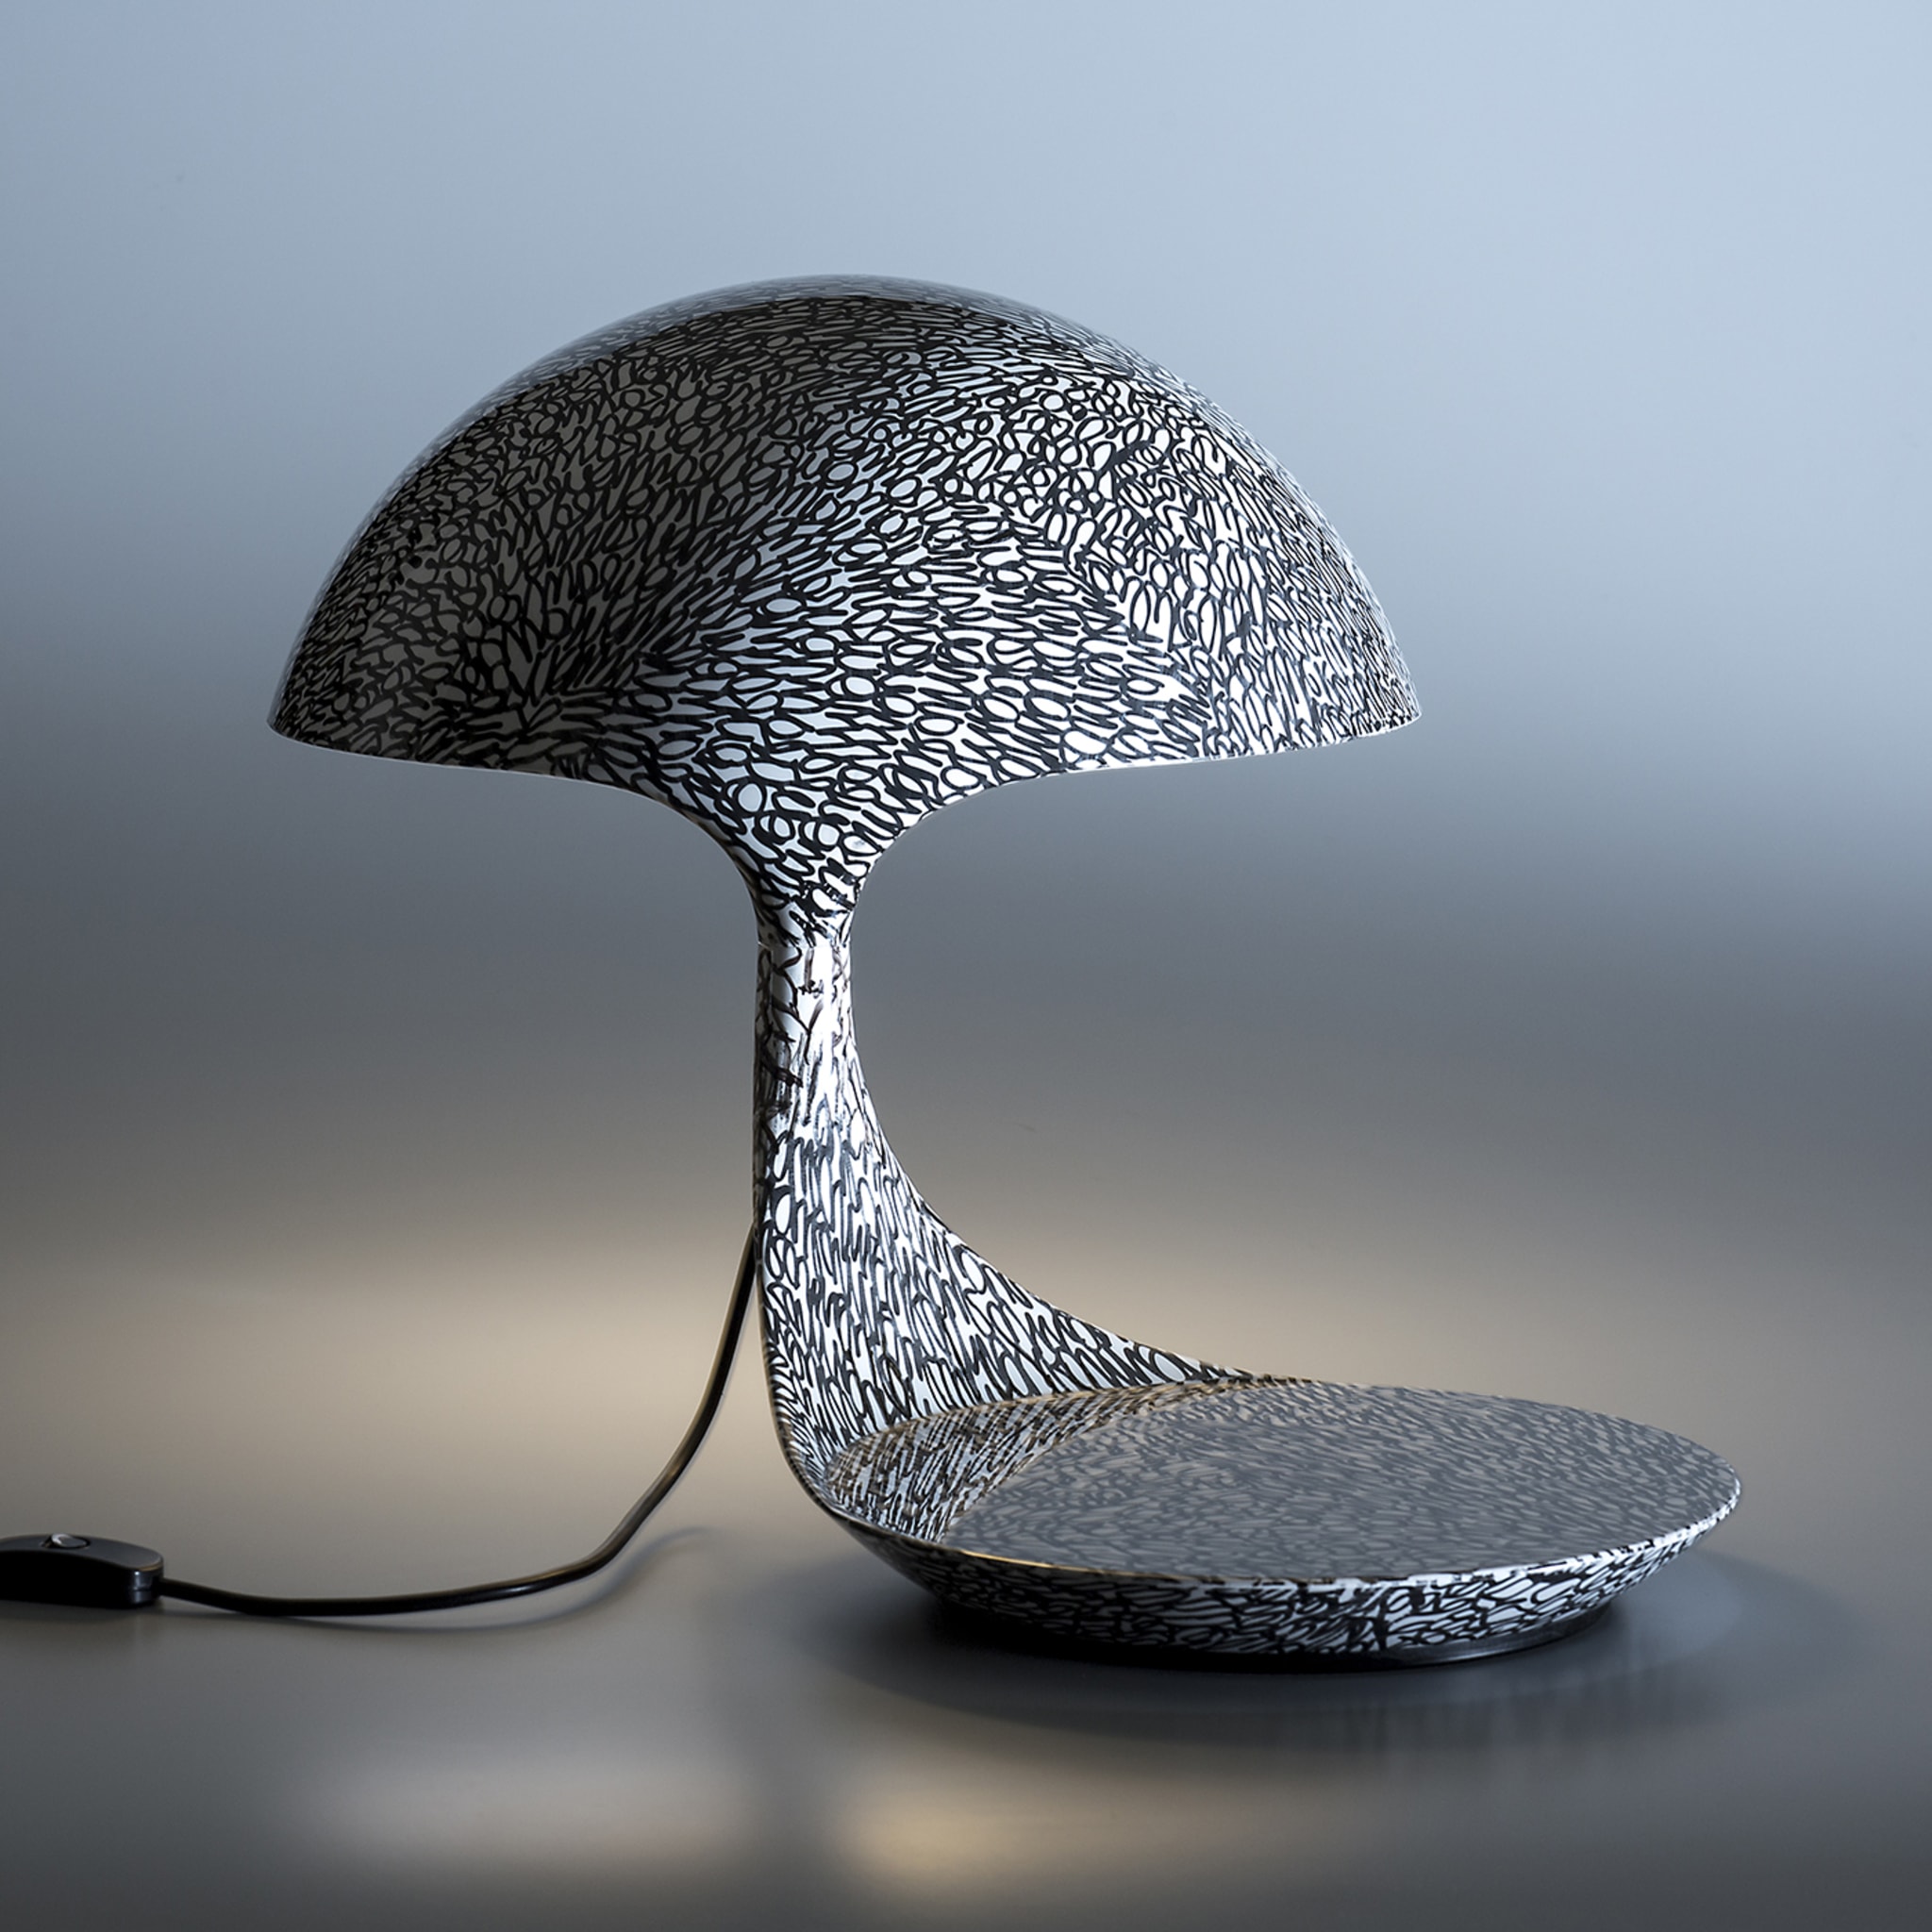 Cobra Texture Black-And-White Table Lamp by A. Femia & A. Simony - Alternative view 1